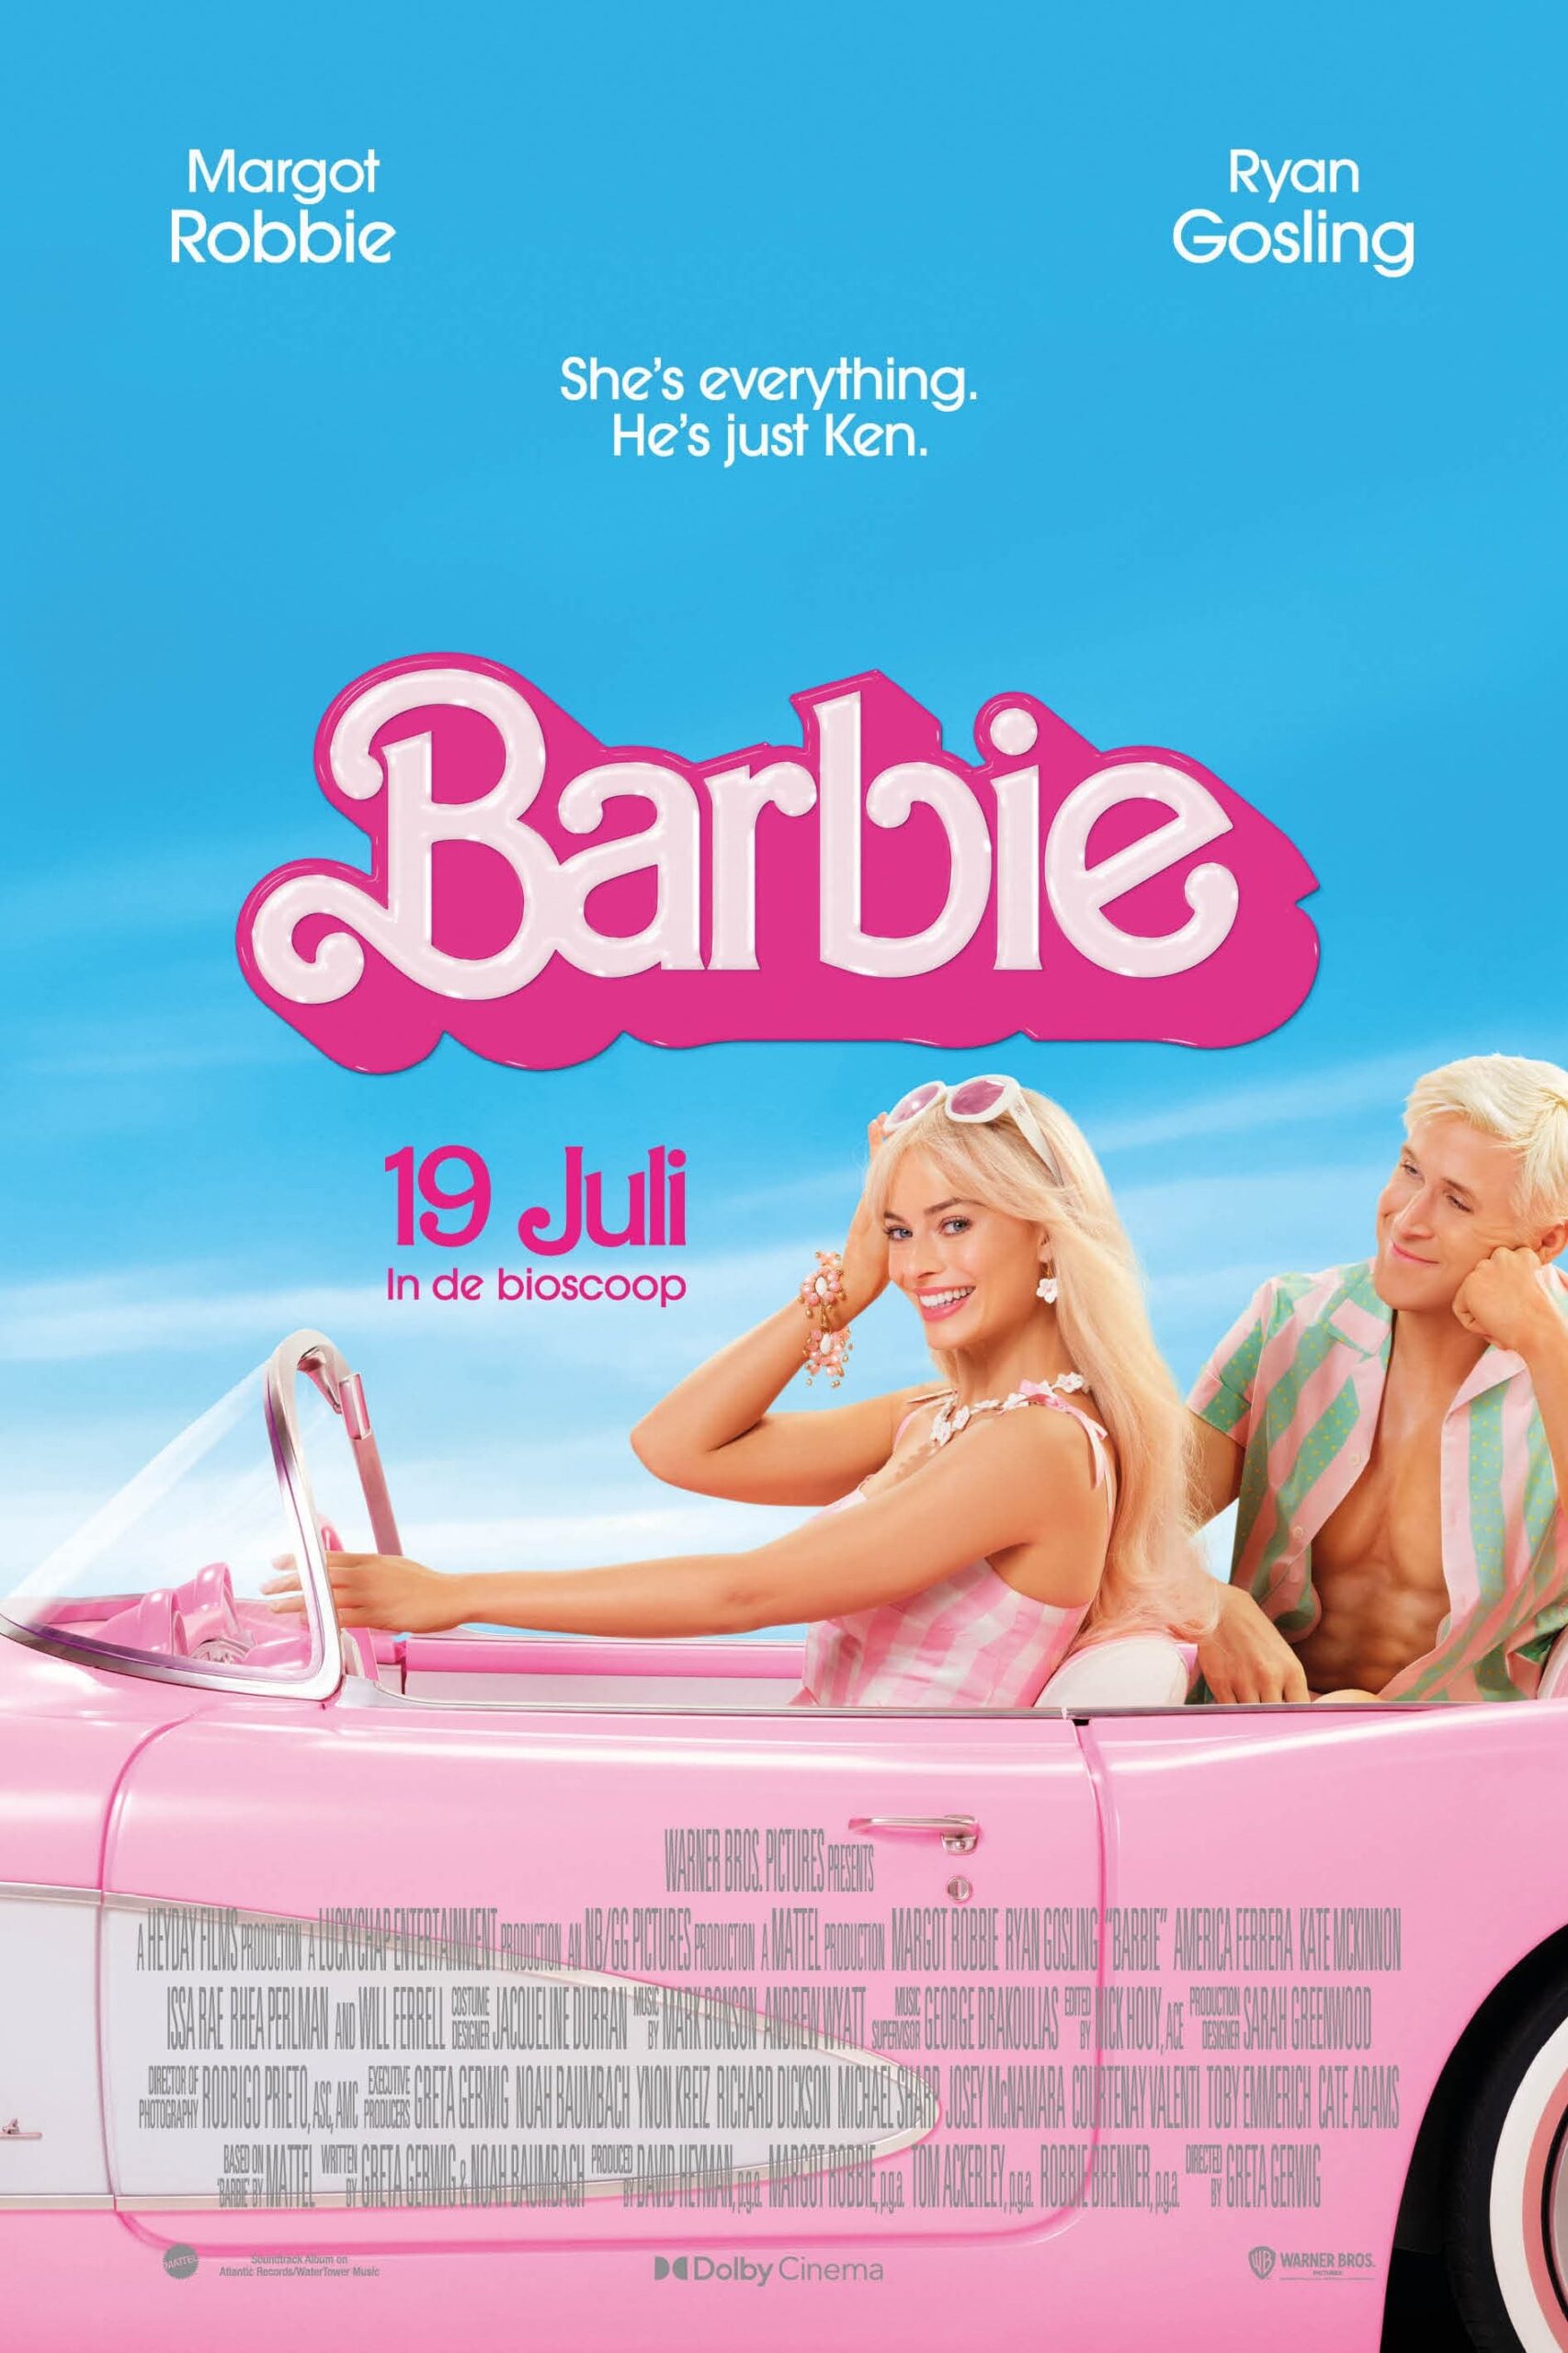 Poster for the movie "Barbie"